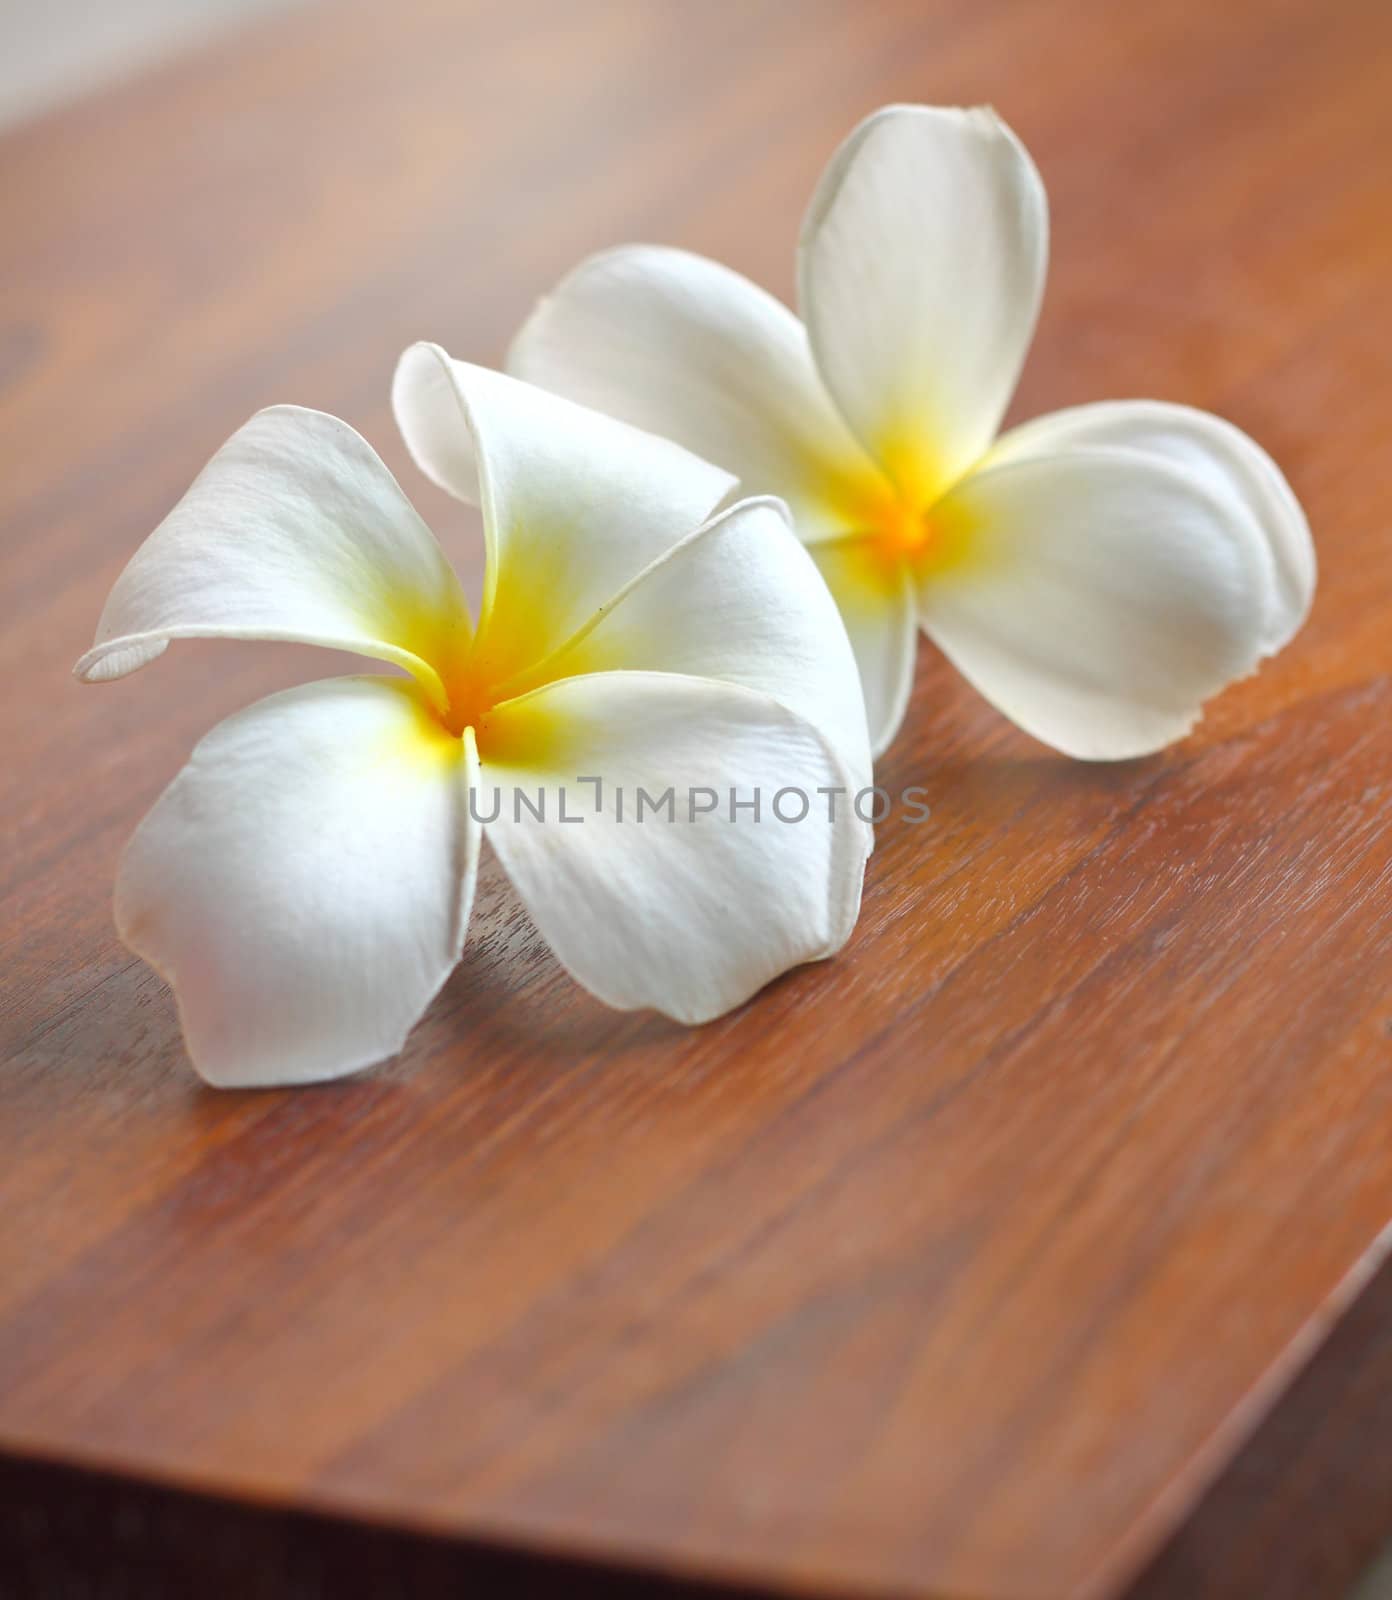 Frangipani flowers on the table  by nuchylee